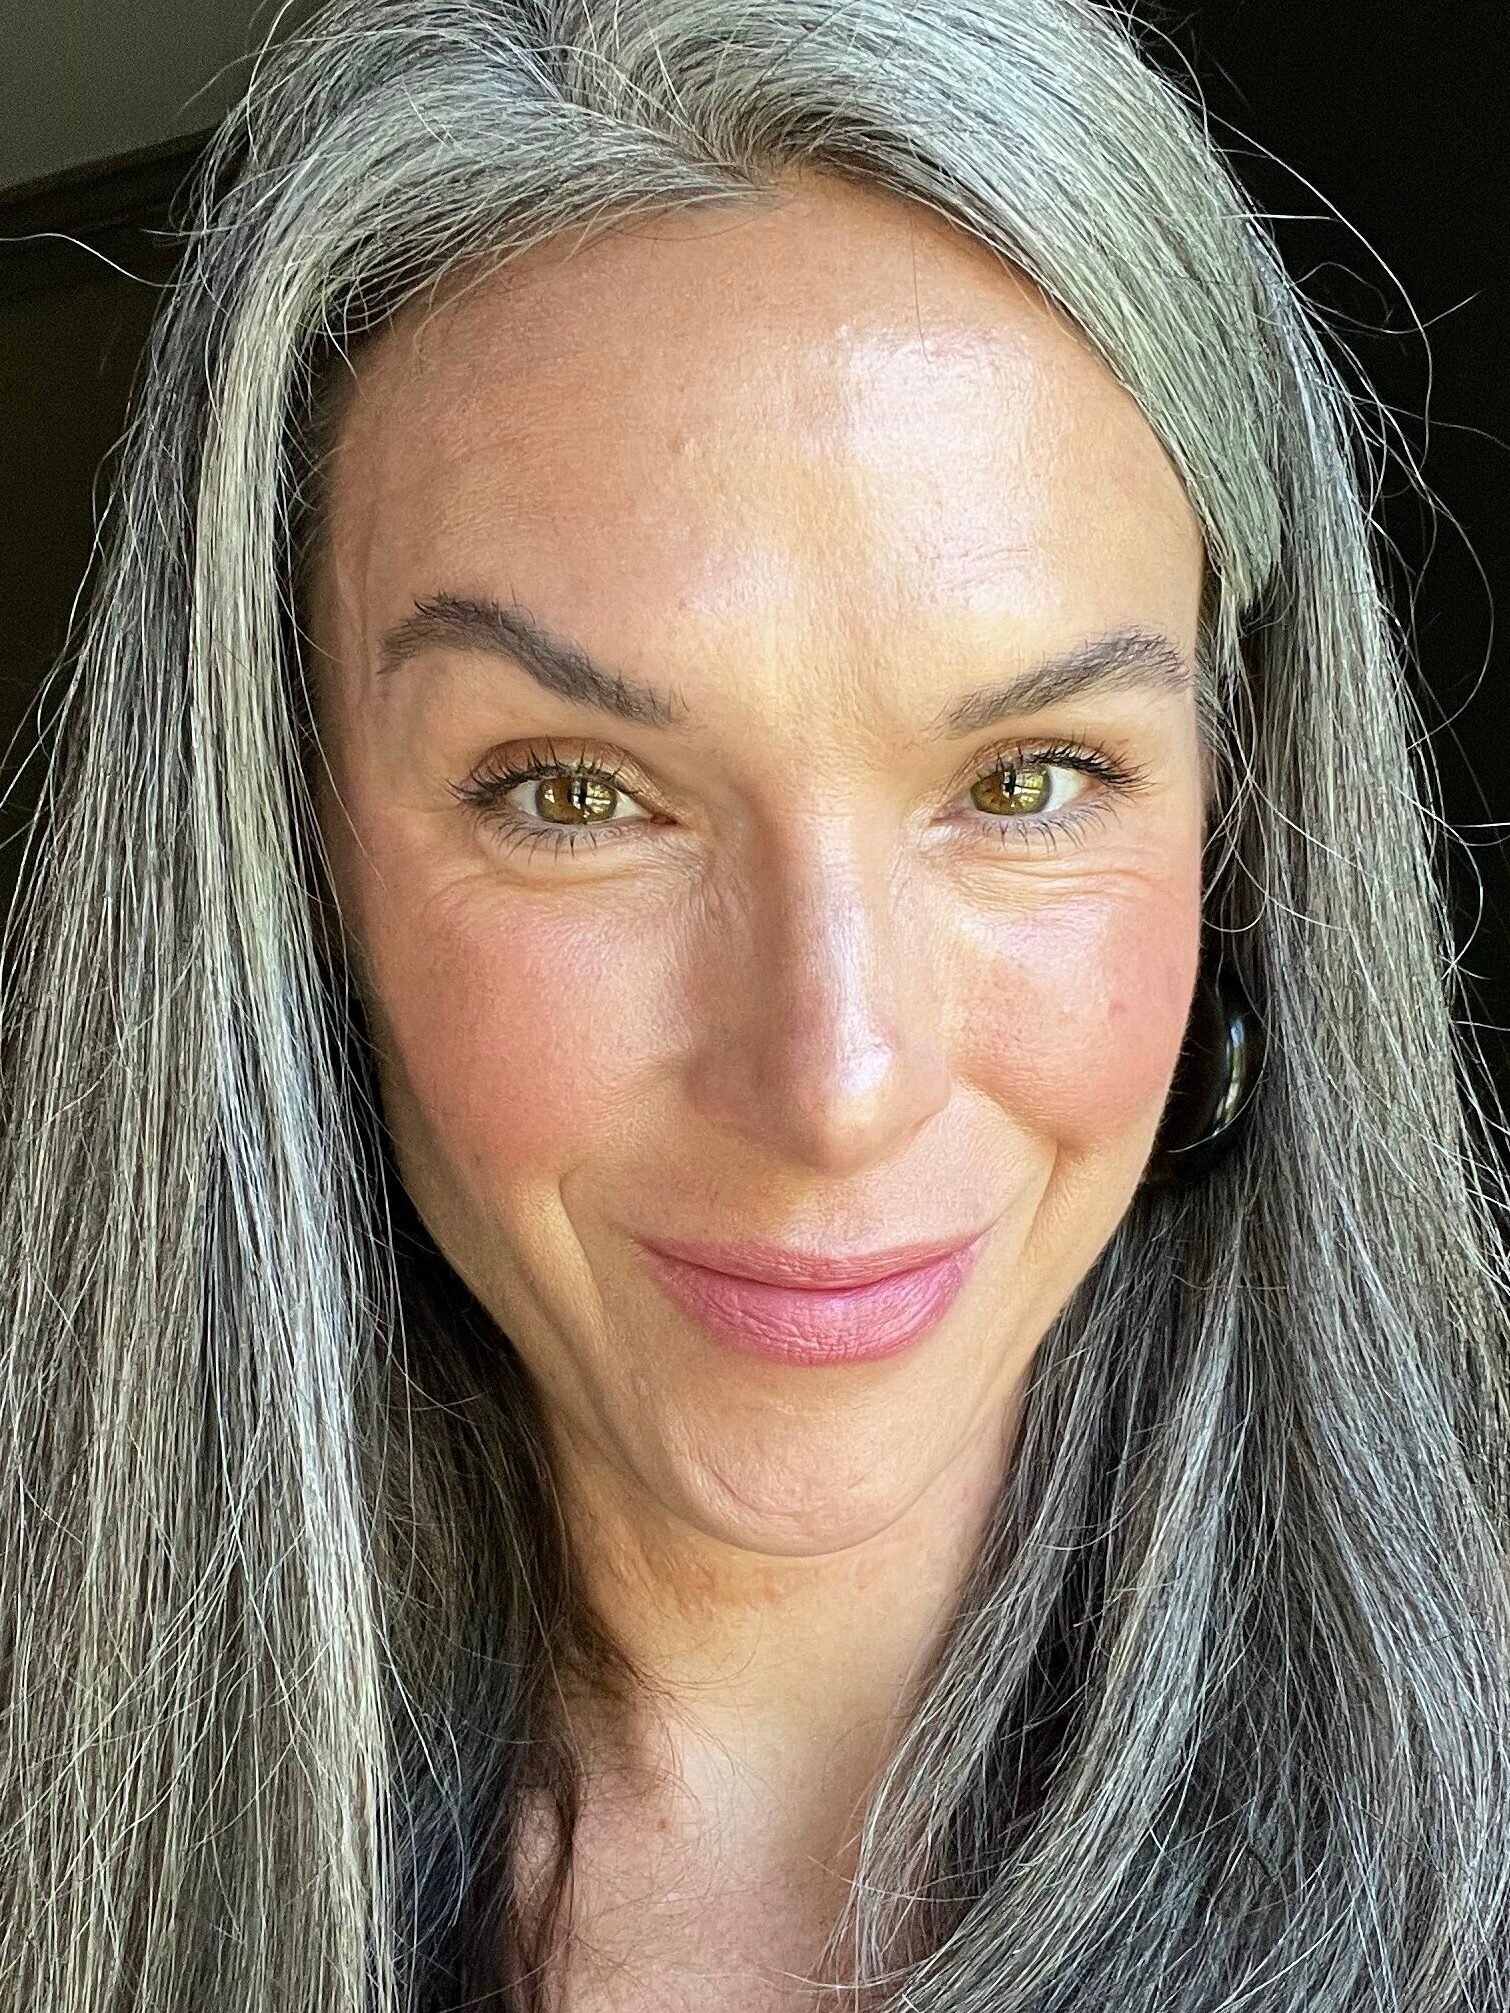 A woman with long straight gray hair